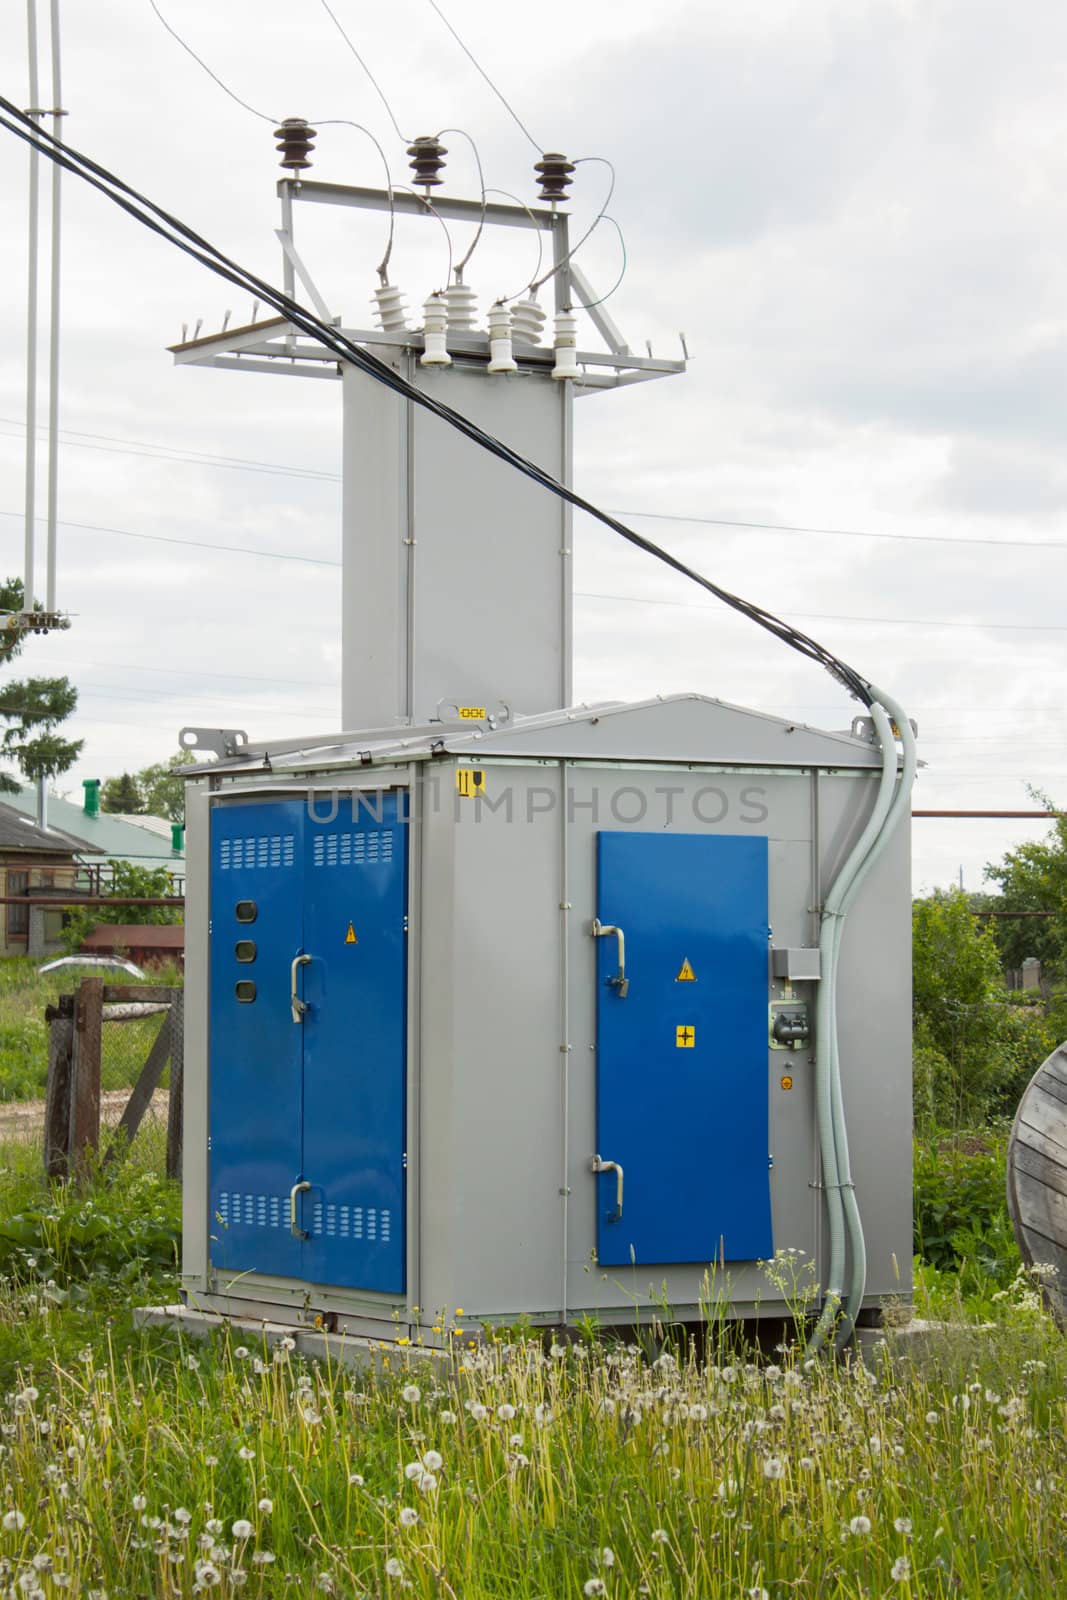 Transformer substation on the outskirts of the village